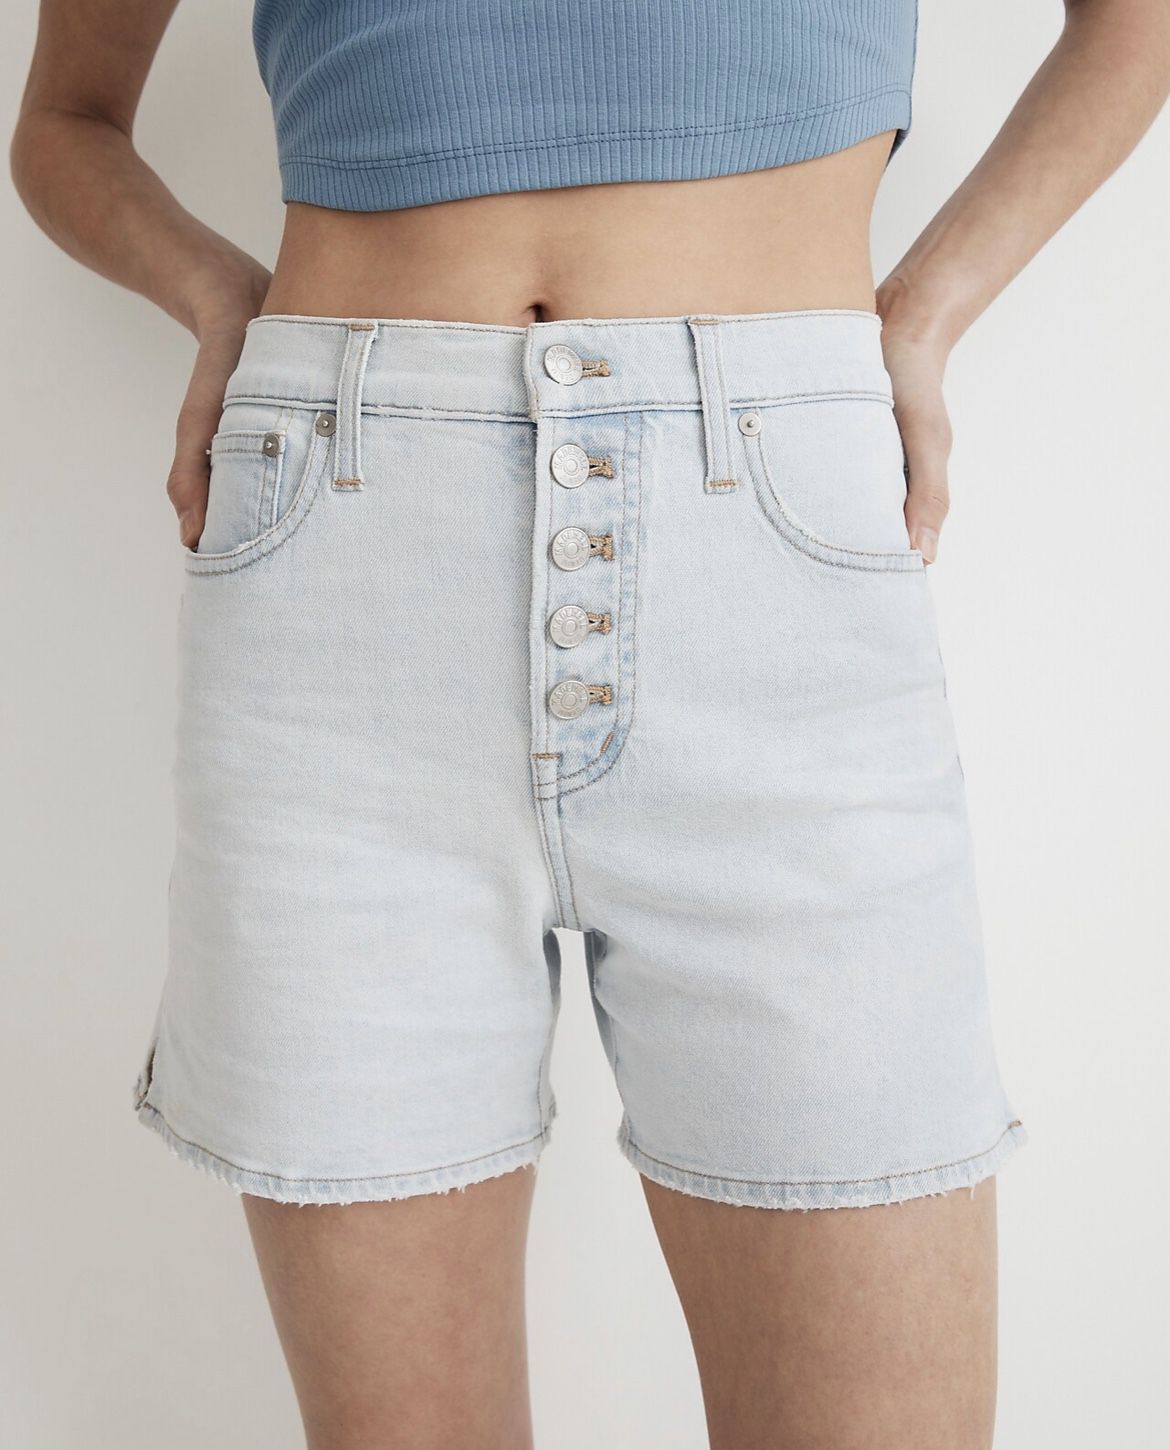 Madewell Women’s Perfect Vintage Shorts $31 NWT